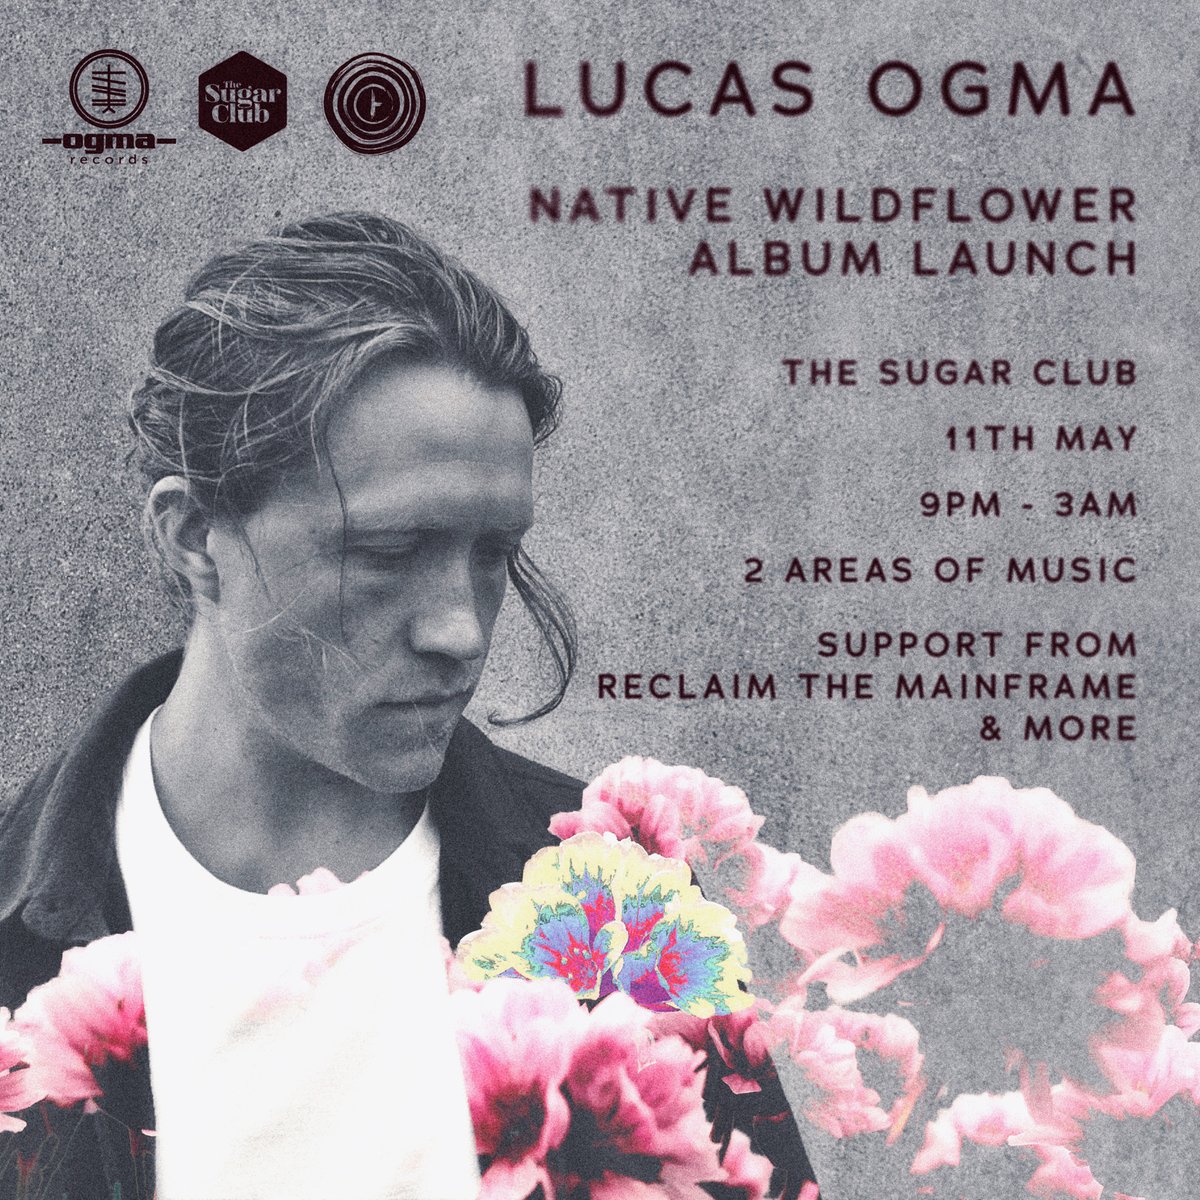 Lucas Ogma releases his debut album ’Native Wildflower’ To celebrate the release of the new album, on the 11/05 The Sugar Club is hosting an evening curated by Luke, across 2 areas of music with support from the Reclaim the Mainframe collective and more. bit.ly/TSC_LucasOgma